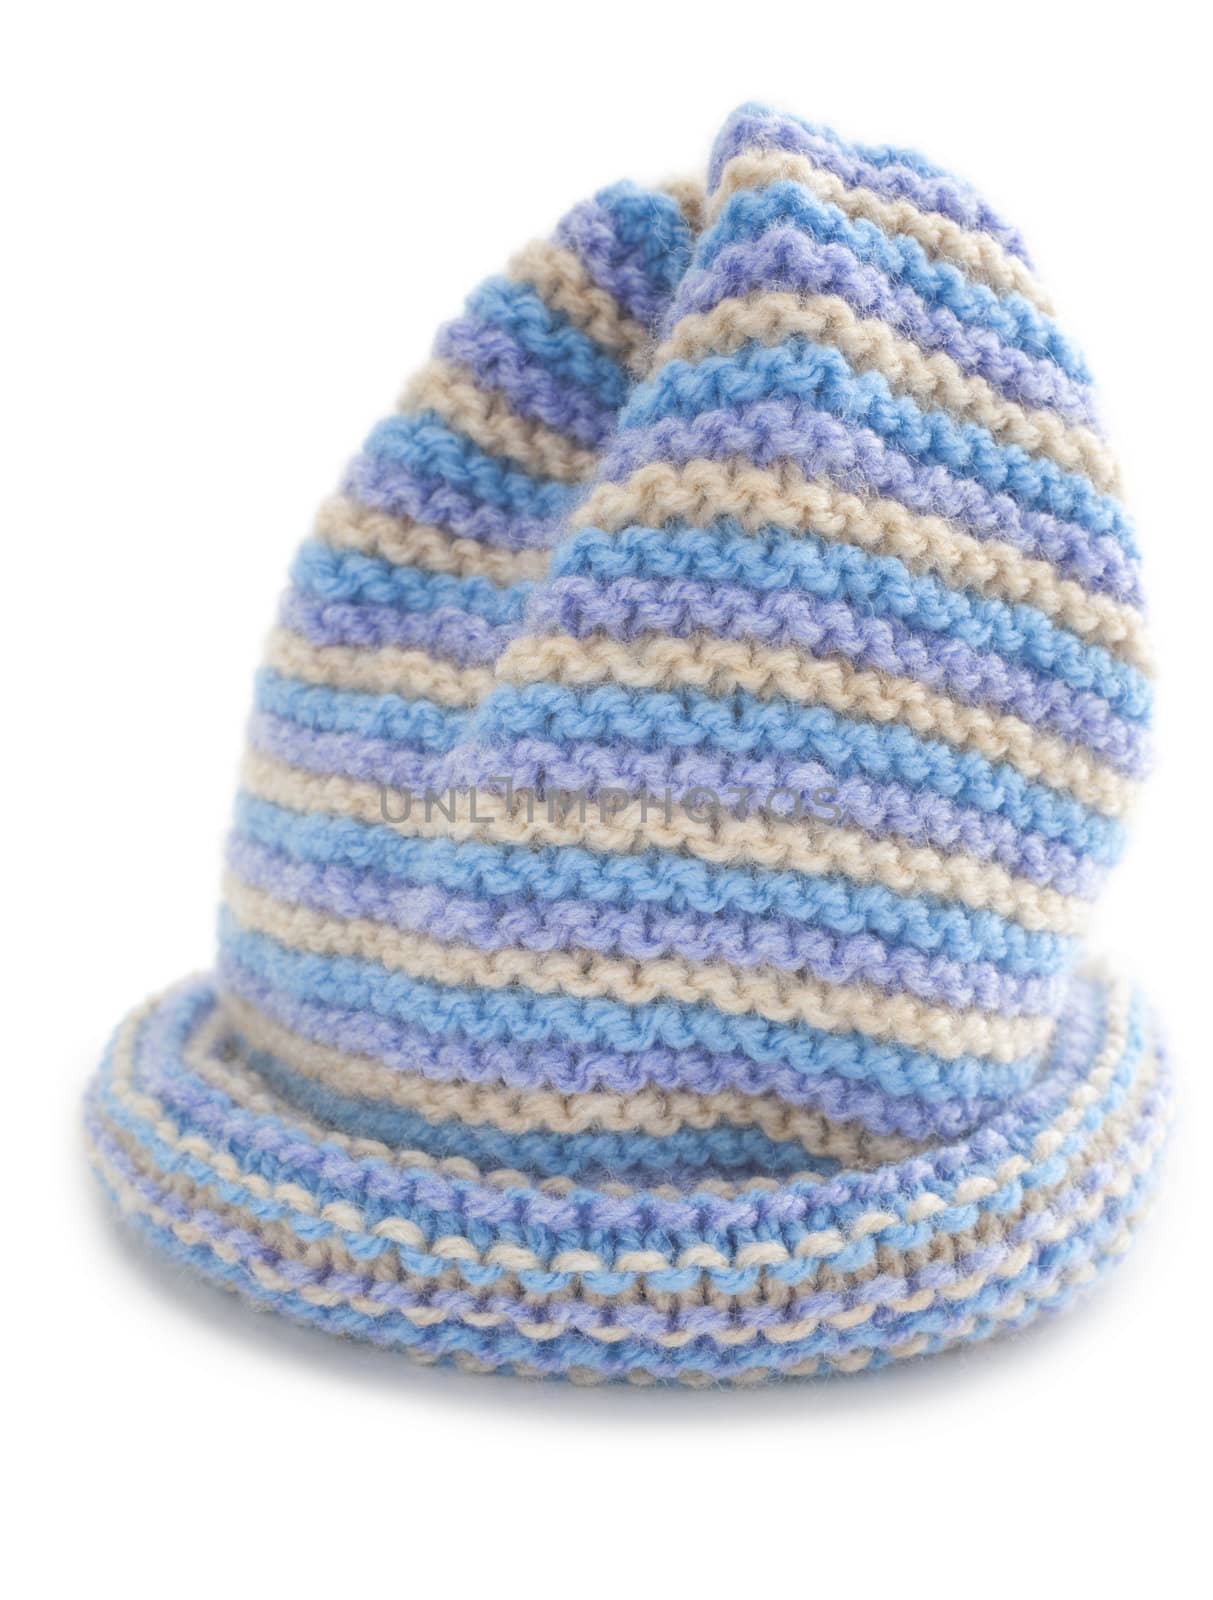 Cute Hand Knitted Baby Hat by Travelling-light